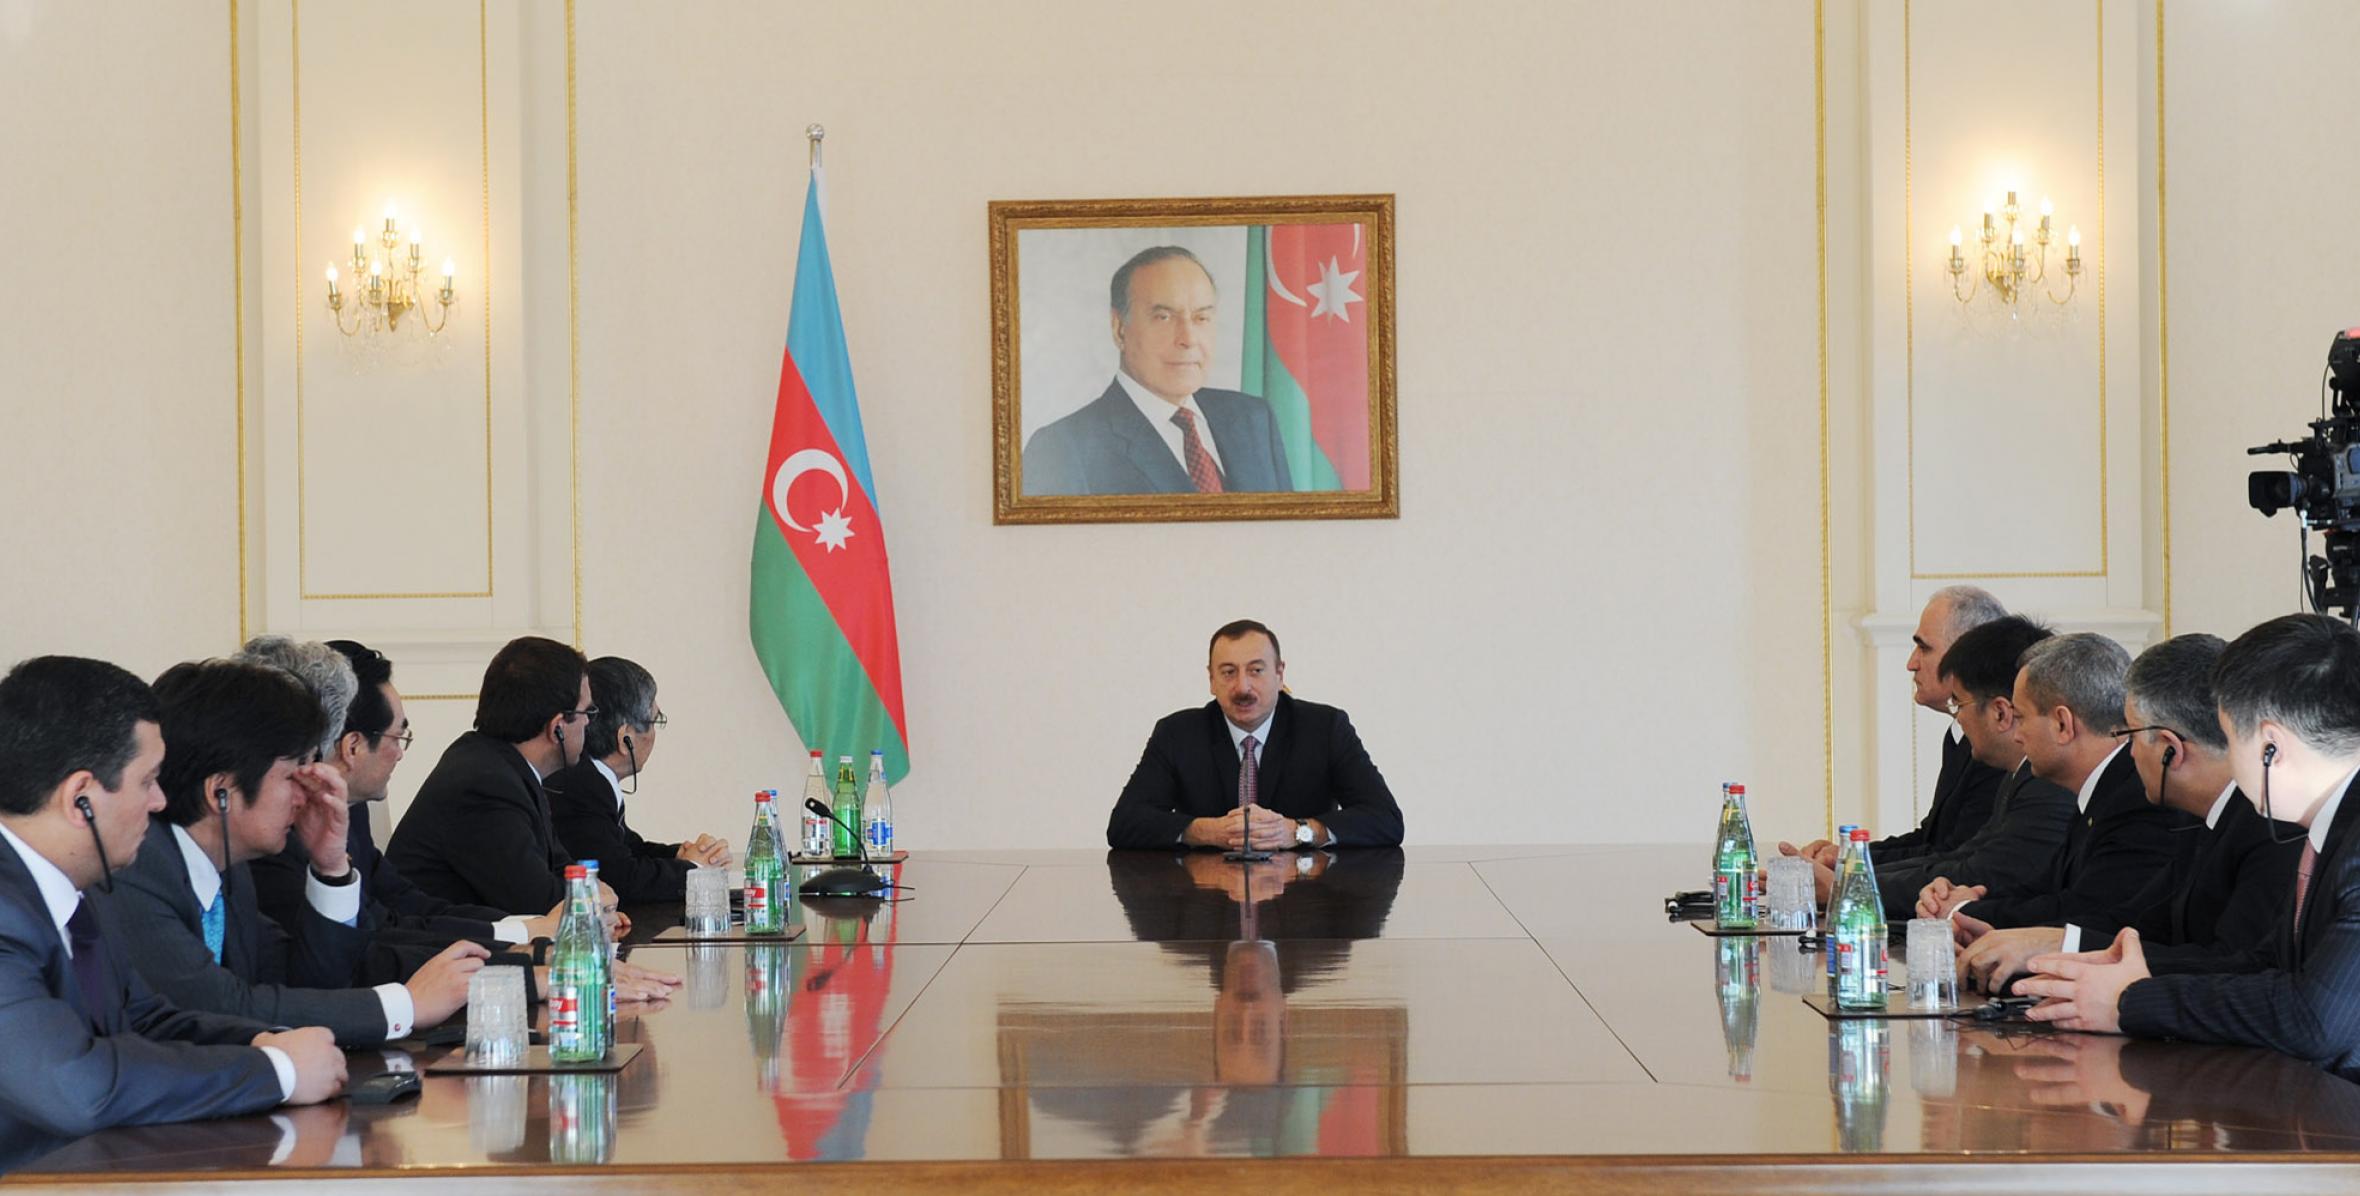 Speech by Ilham Aliyev at the meeting with participants of the 10th anniversary Ministerial Conference of the Central Asia Regional Economic Cooperation Program